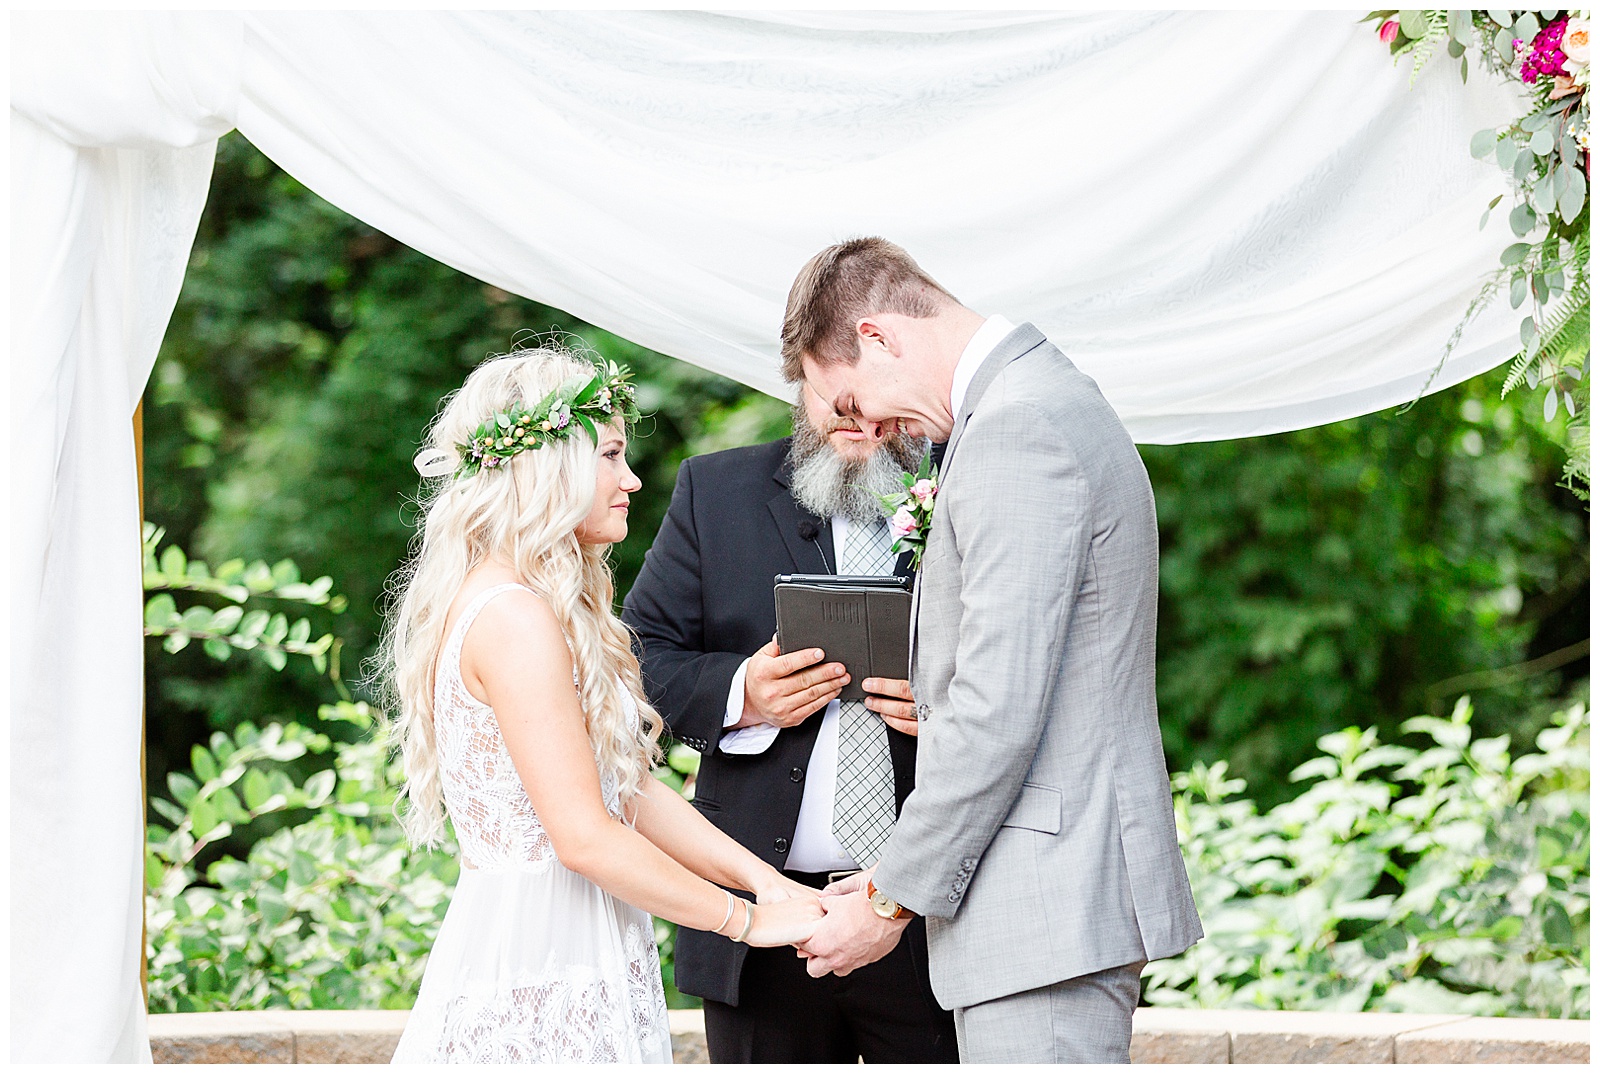 Emotional Bohemian Bride Ceremony from Boho Chic Summer Wedding in Charlotte, NC | check out the full wedding at KevynDixonPhoto.com 